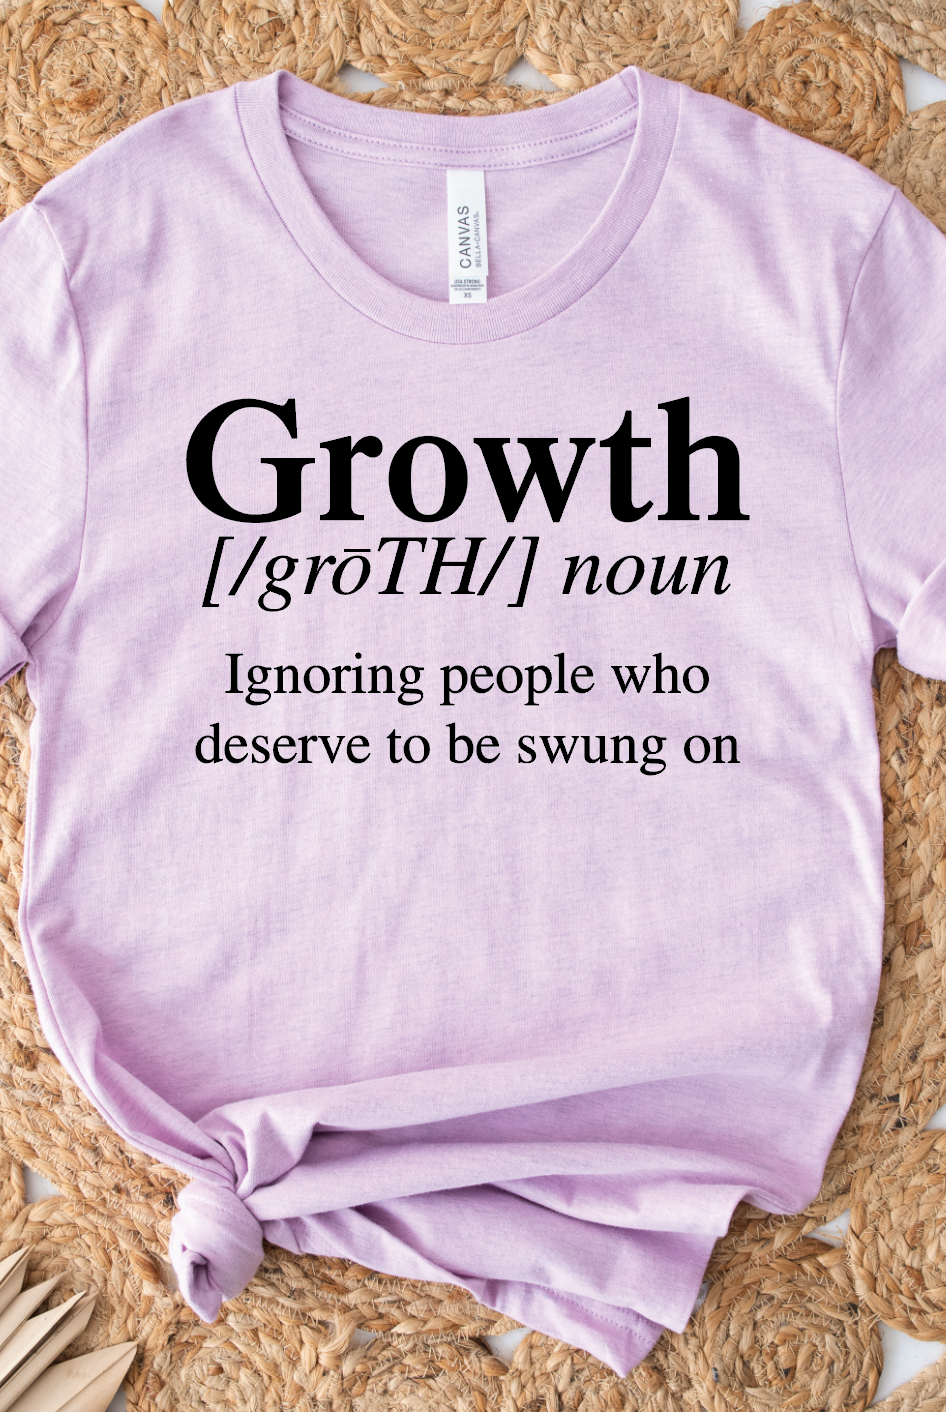 Growth-Graphic Tee- Simply Simpson's Boutique is a Women's Online Fashion Boutique Located in Jupiter, Florida